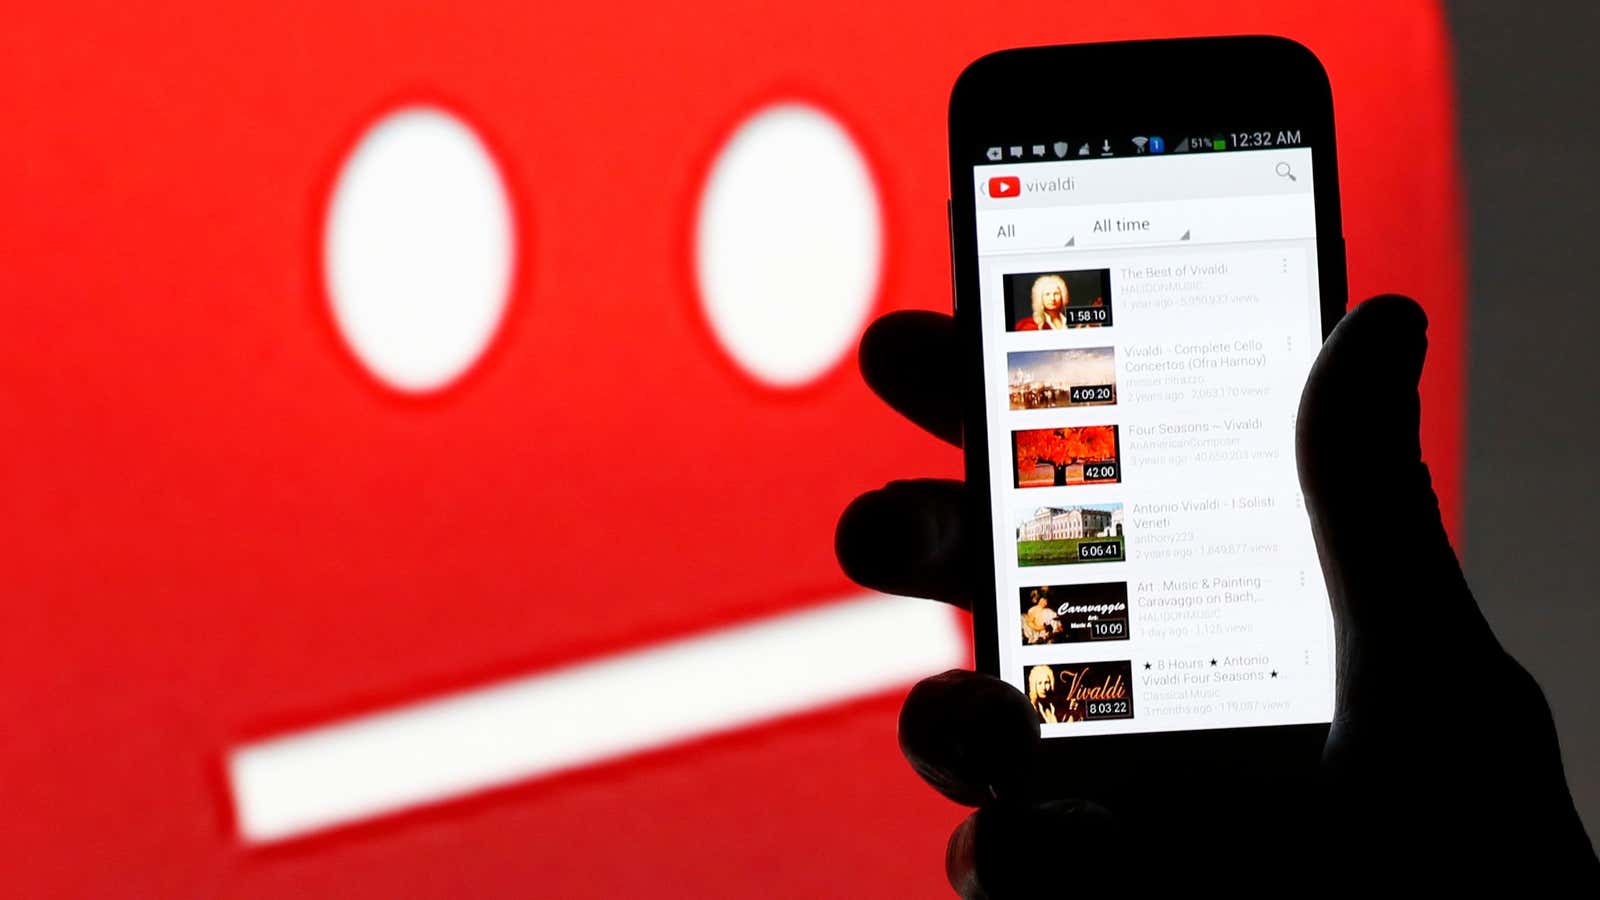 Autoplay can lead you into dark corners of YouTube.